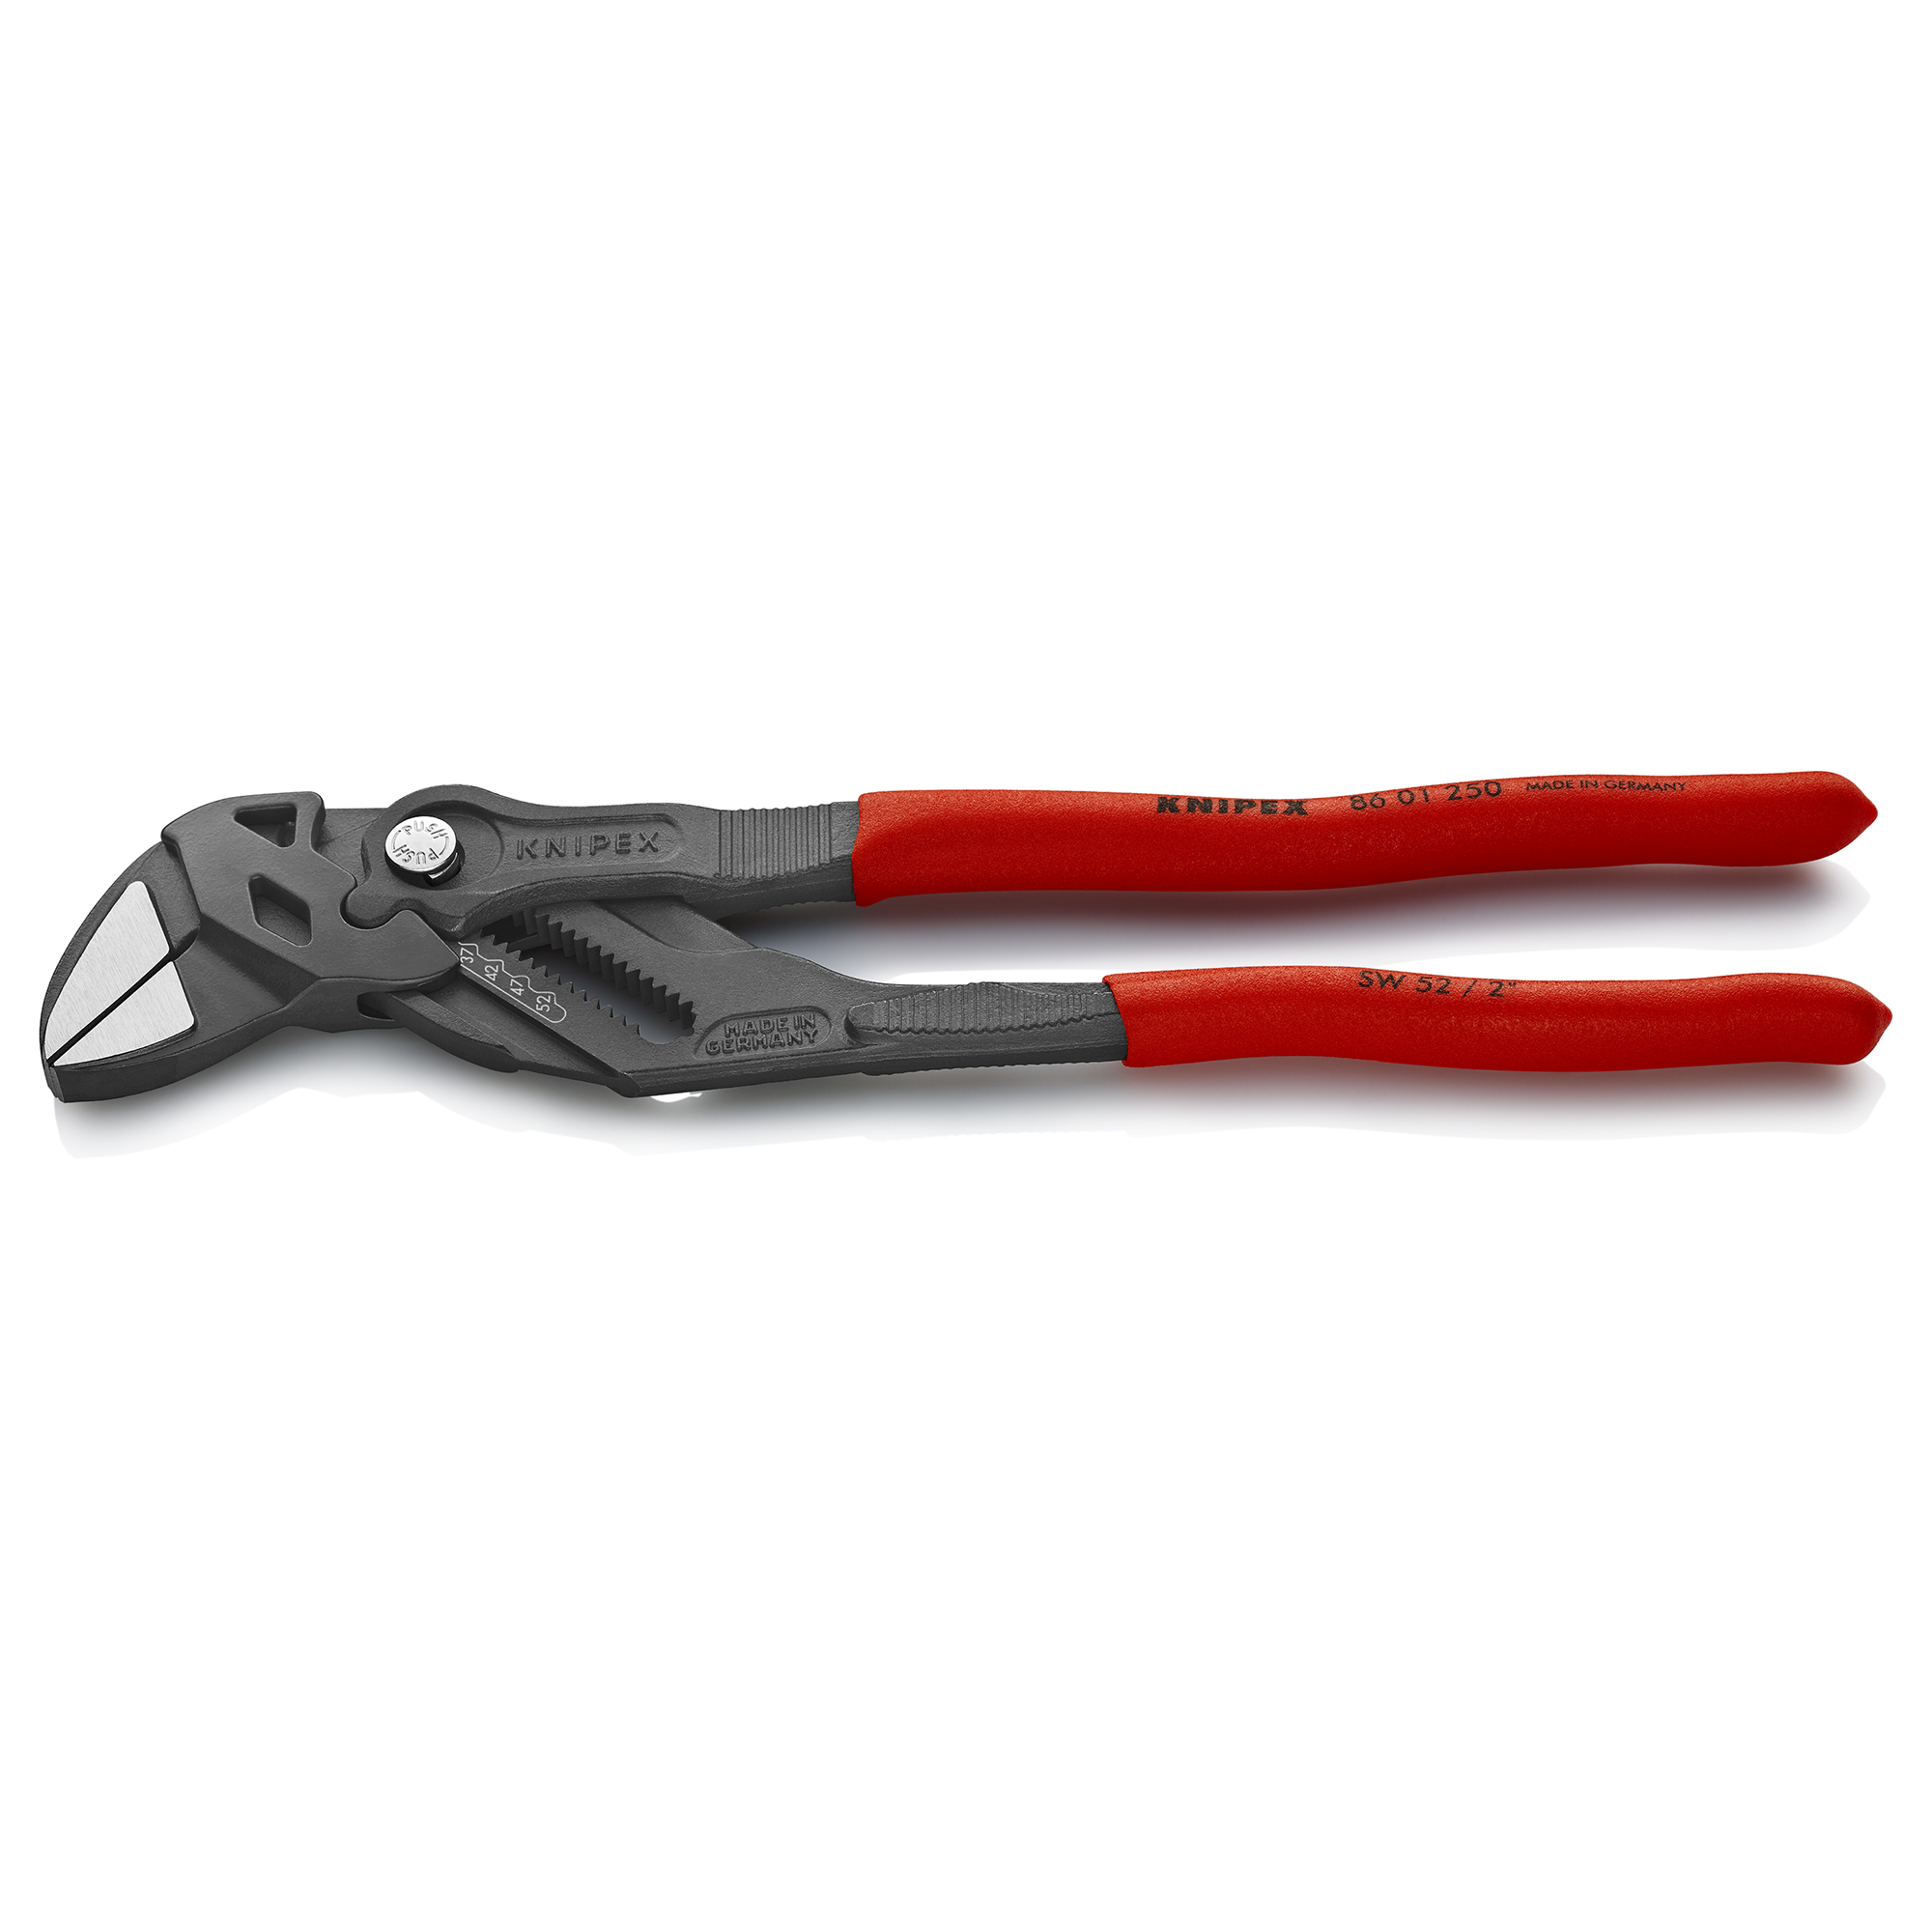 KNIPEX Plier Wrenches 250 mm คีมประแจ 250 มม. รุ่น 8601250